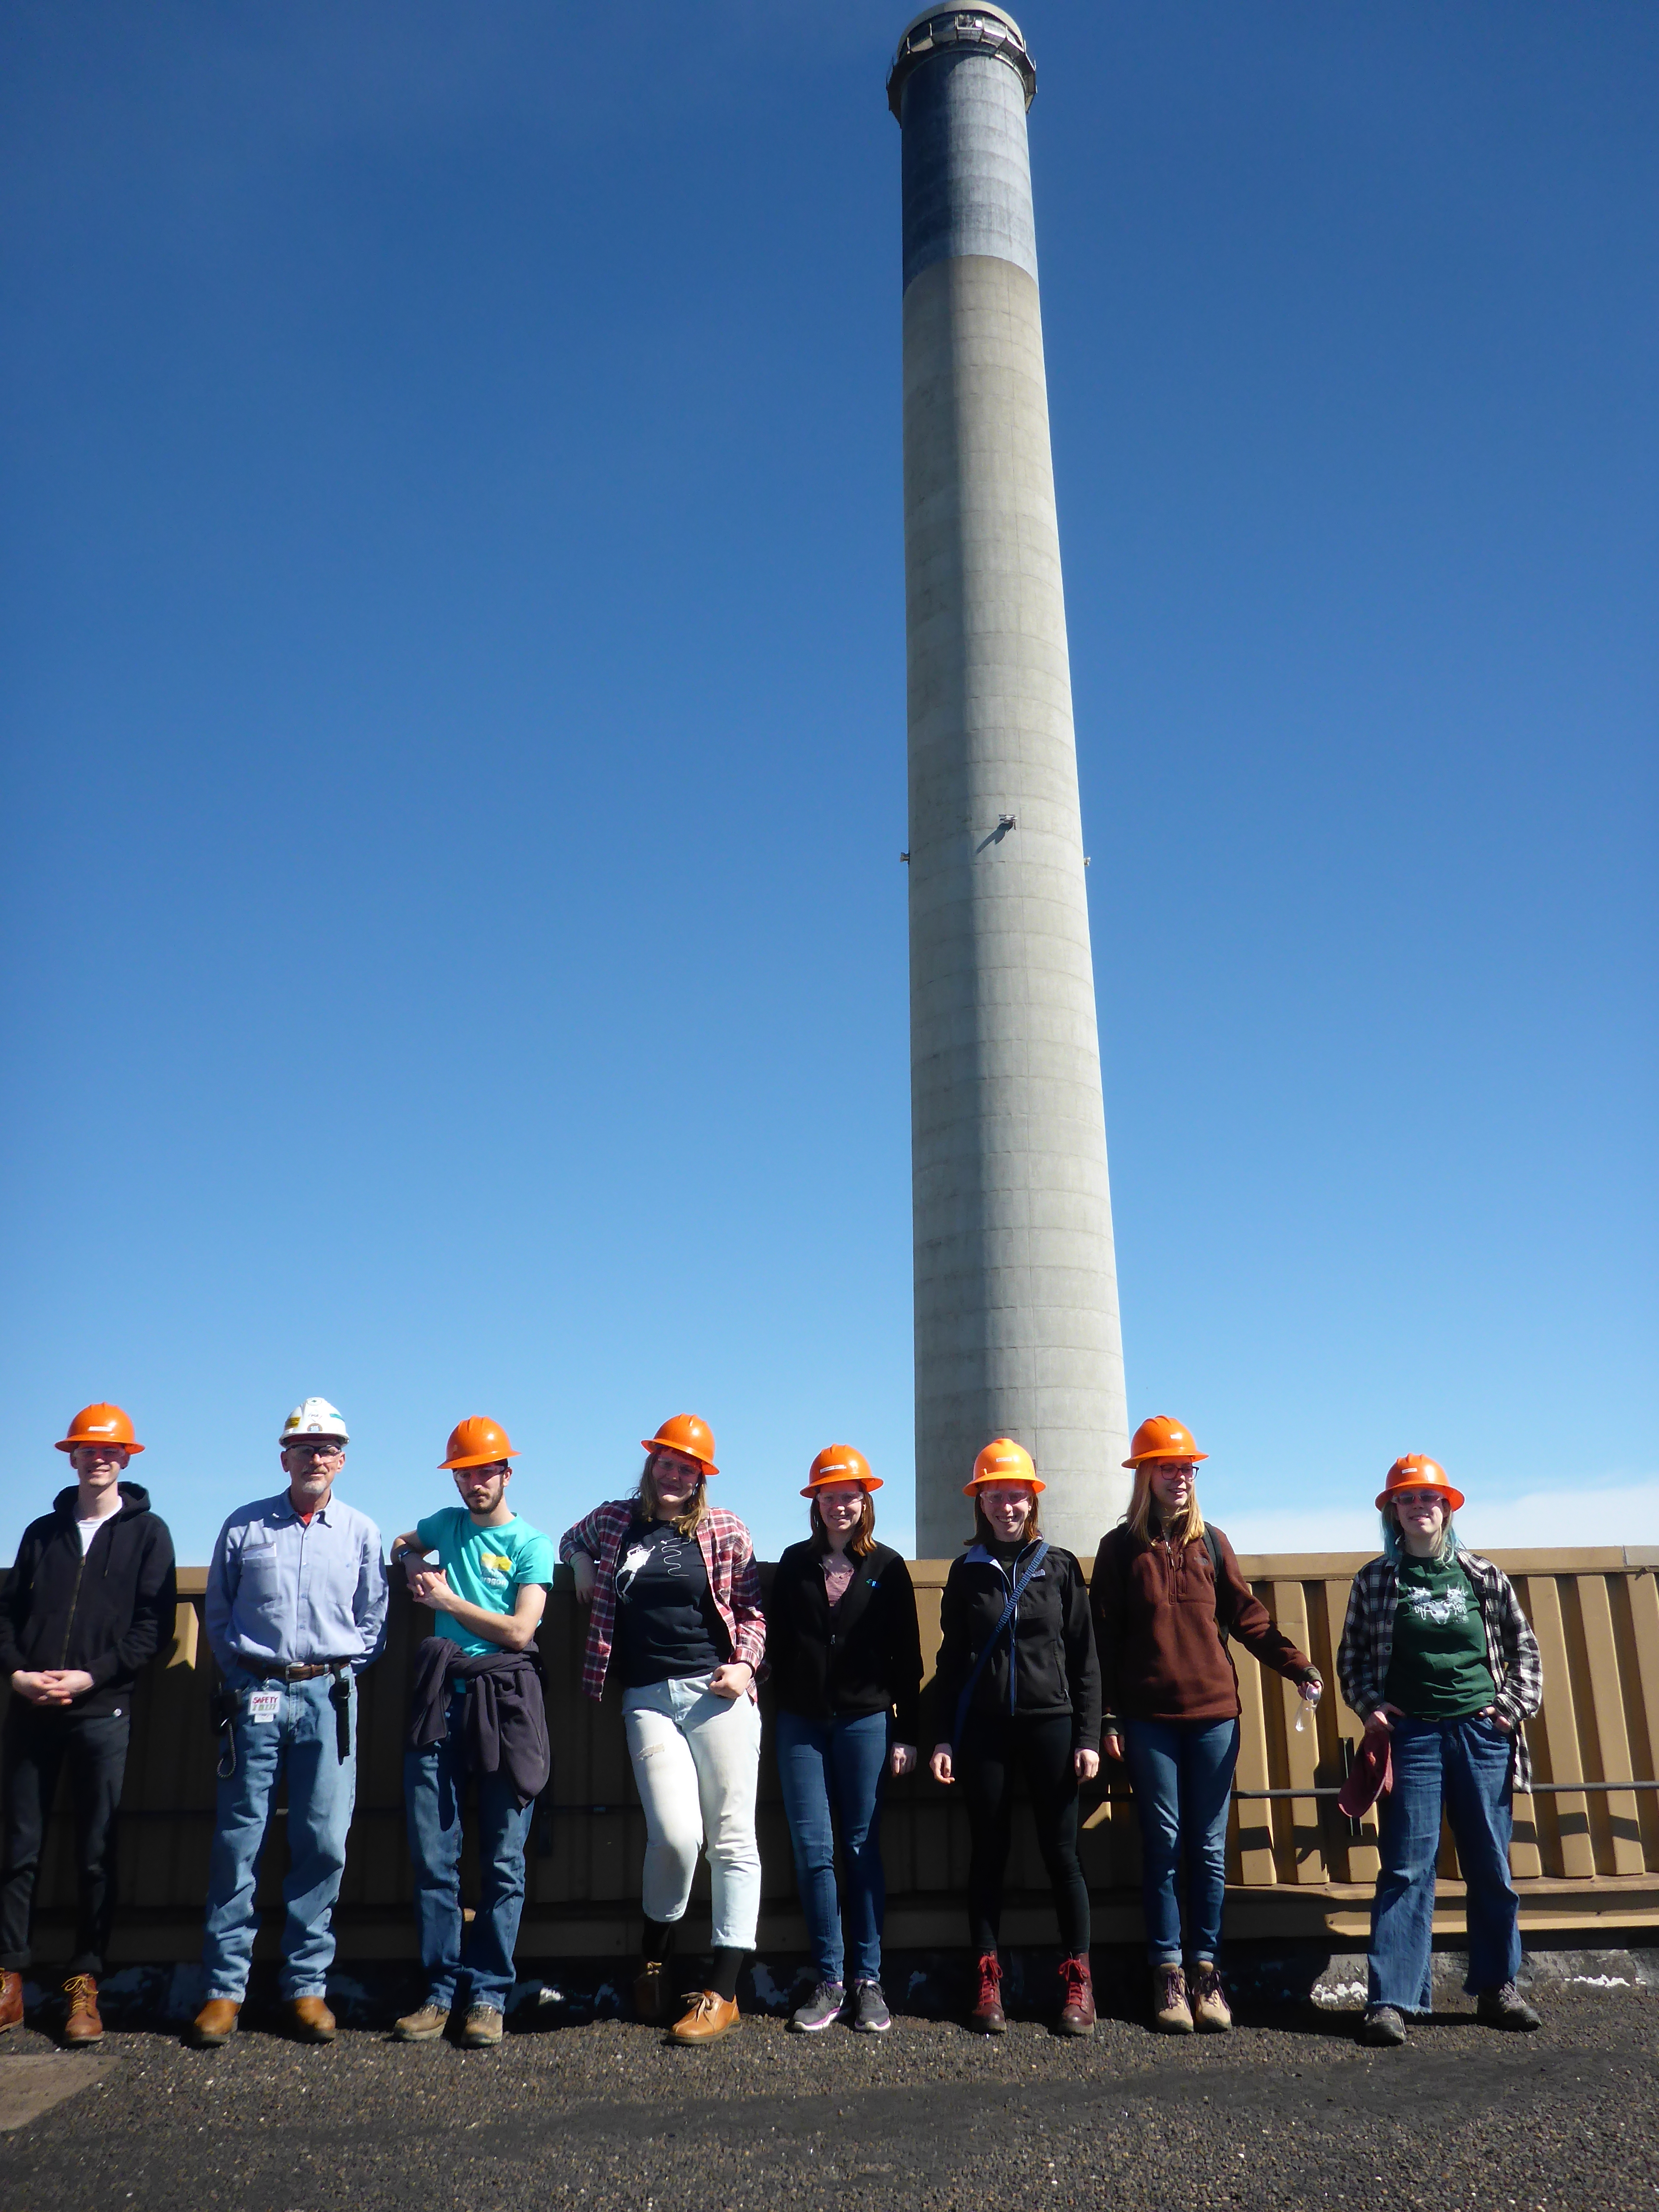 2017 fieldtrip to the Boardman power plant and wind energy farms.